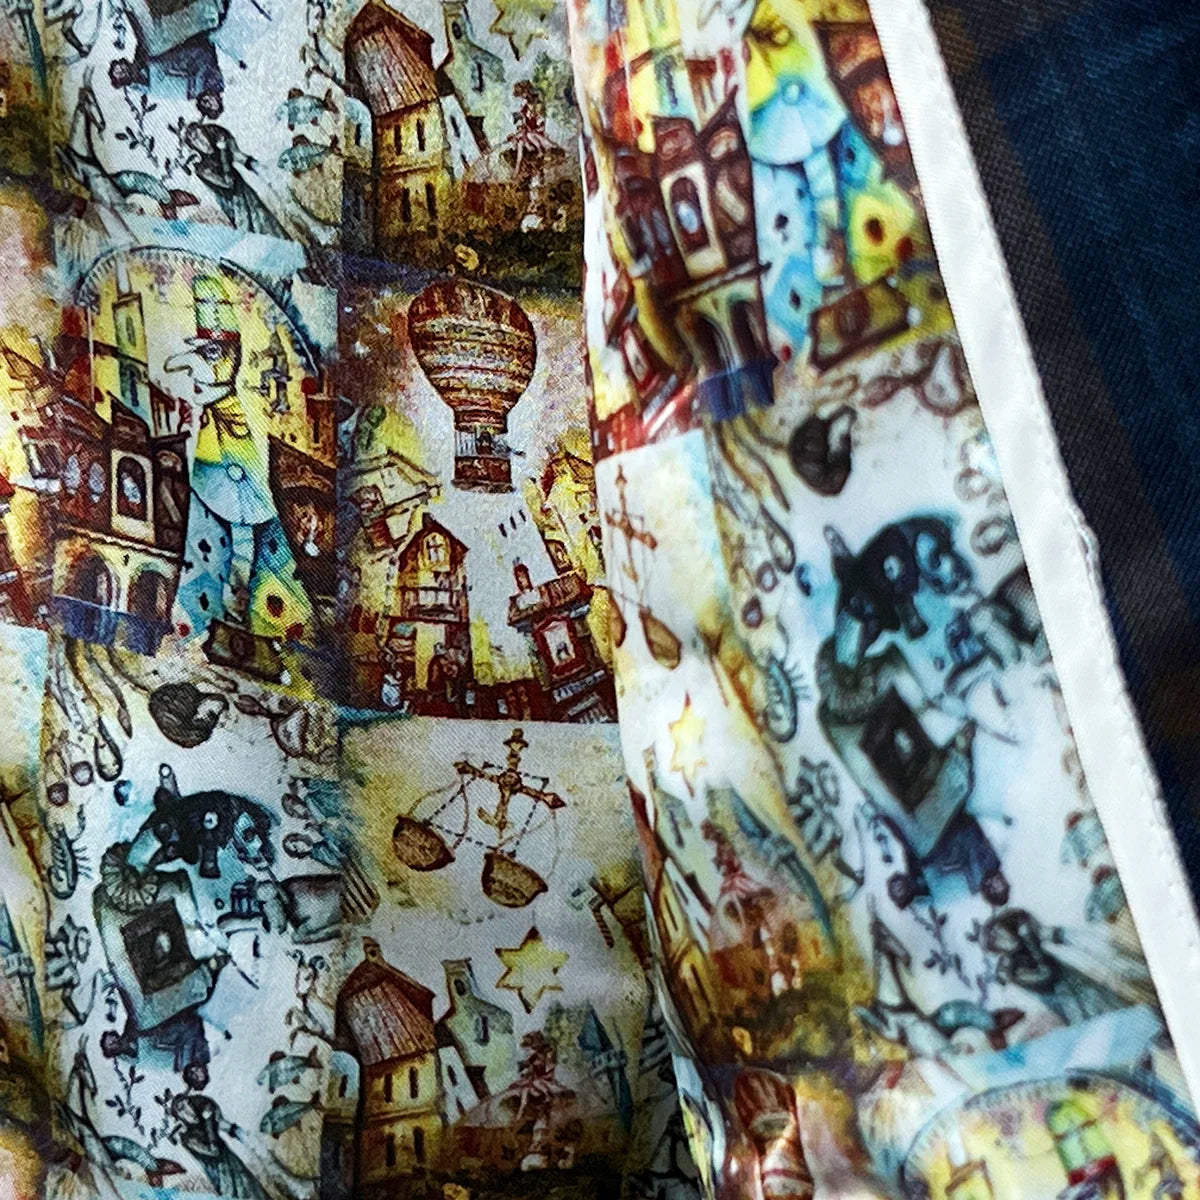 Detailed view of the flash linings, depicting scenes from the Wizard of Oz inside the sportcoat.